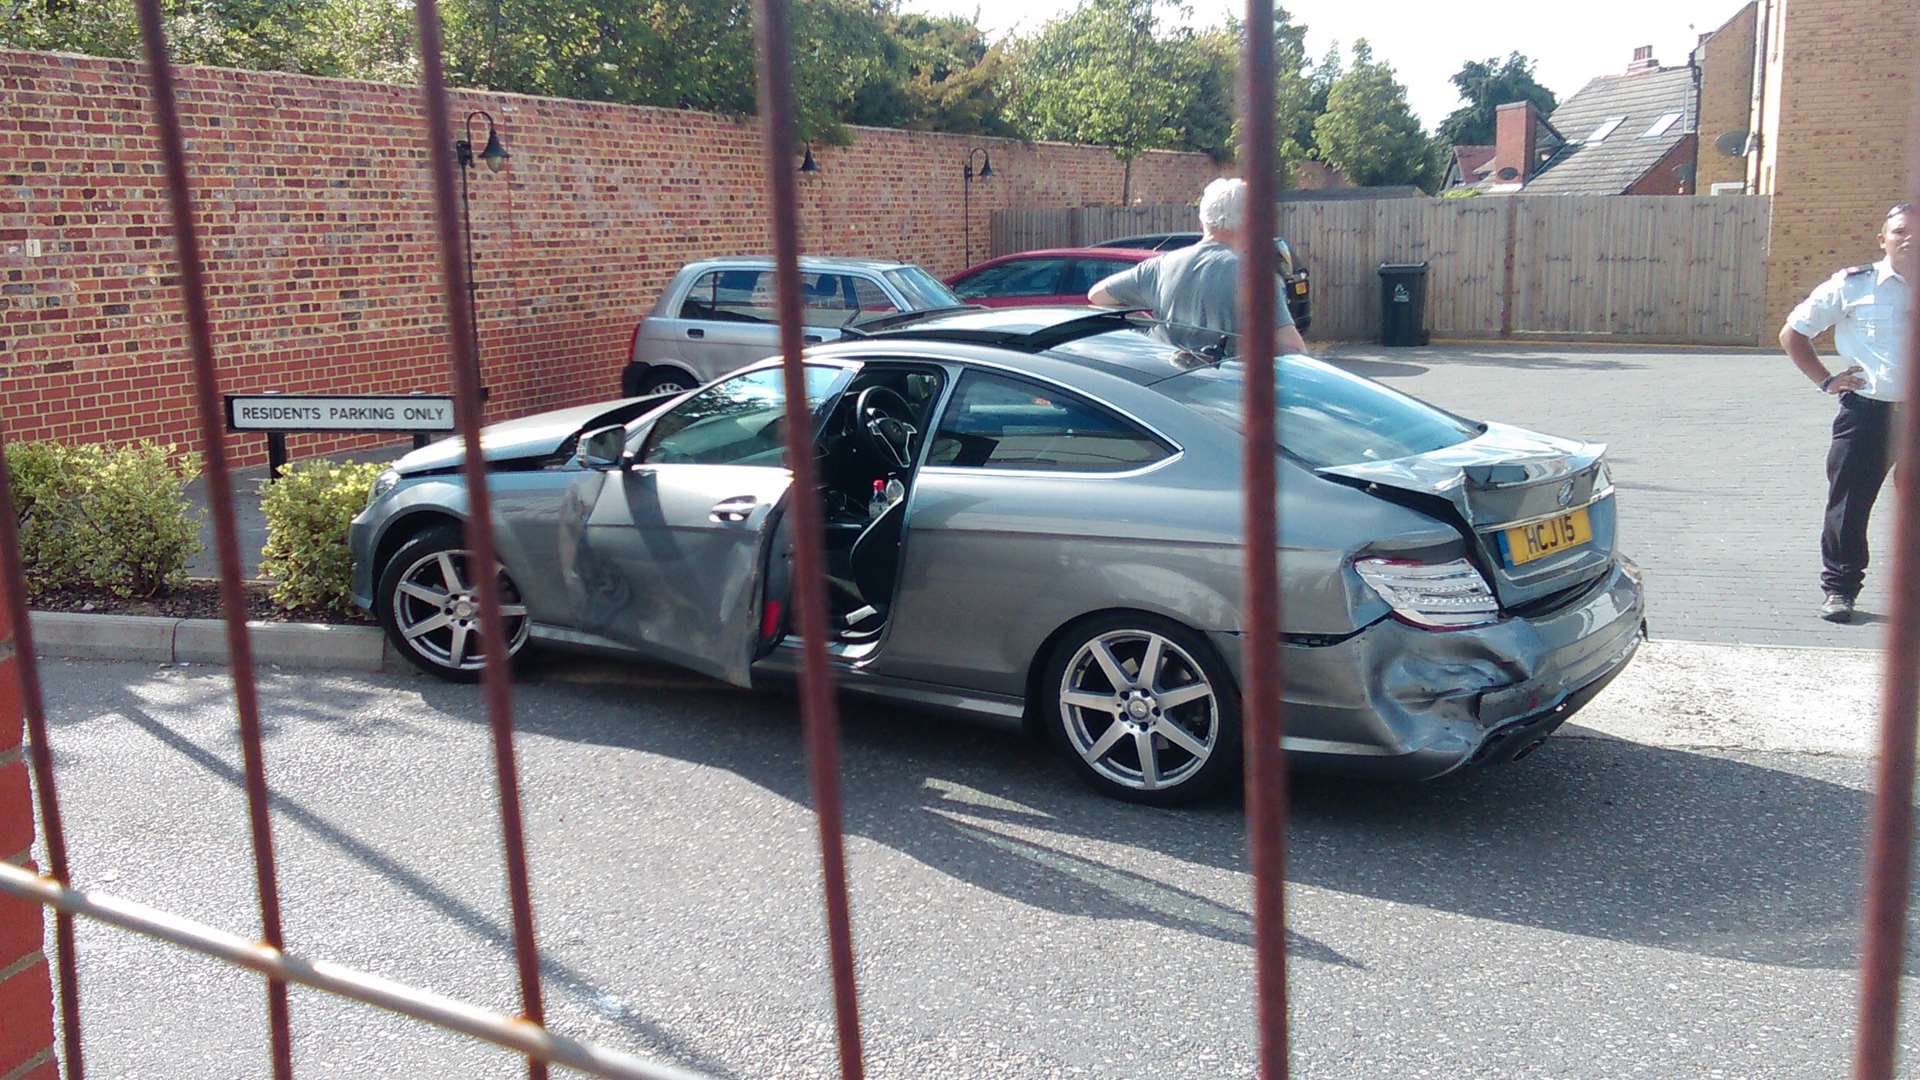 A car was said to have collided with the woman, and several parked cars